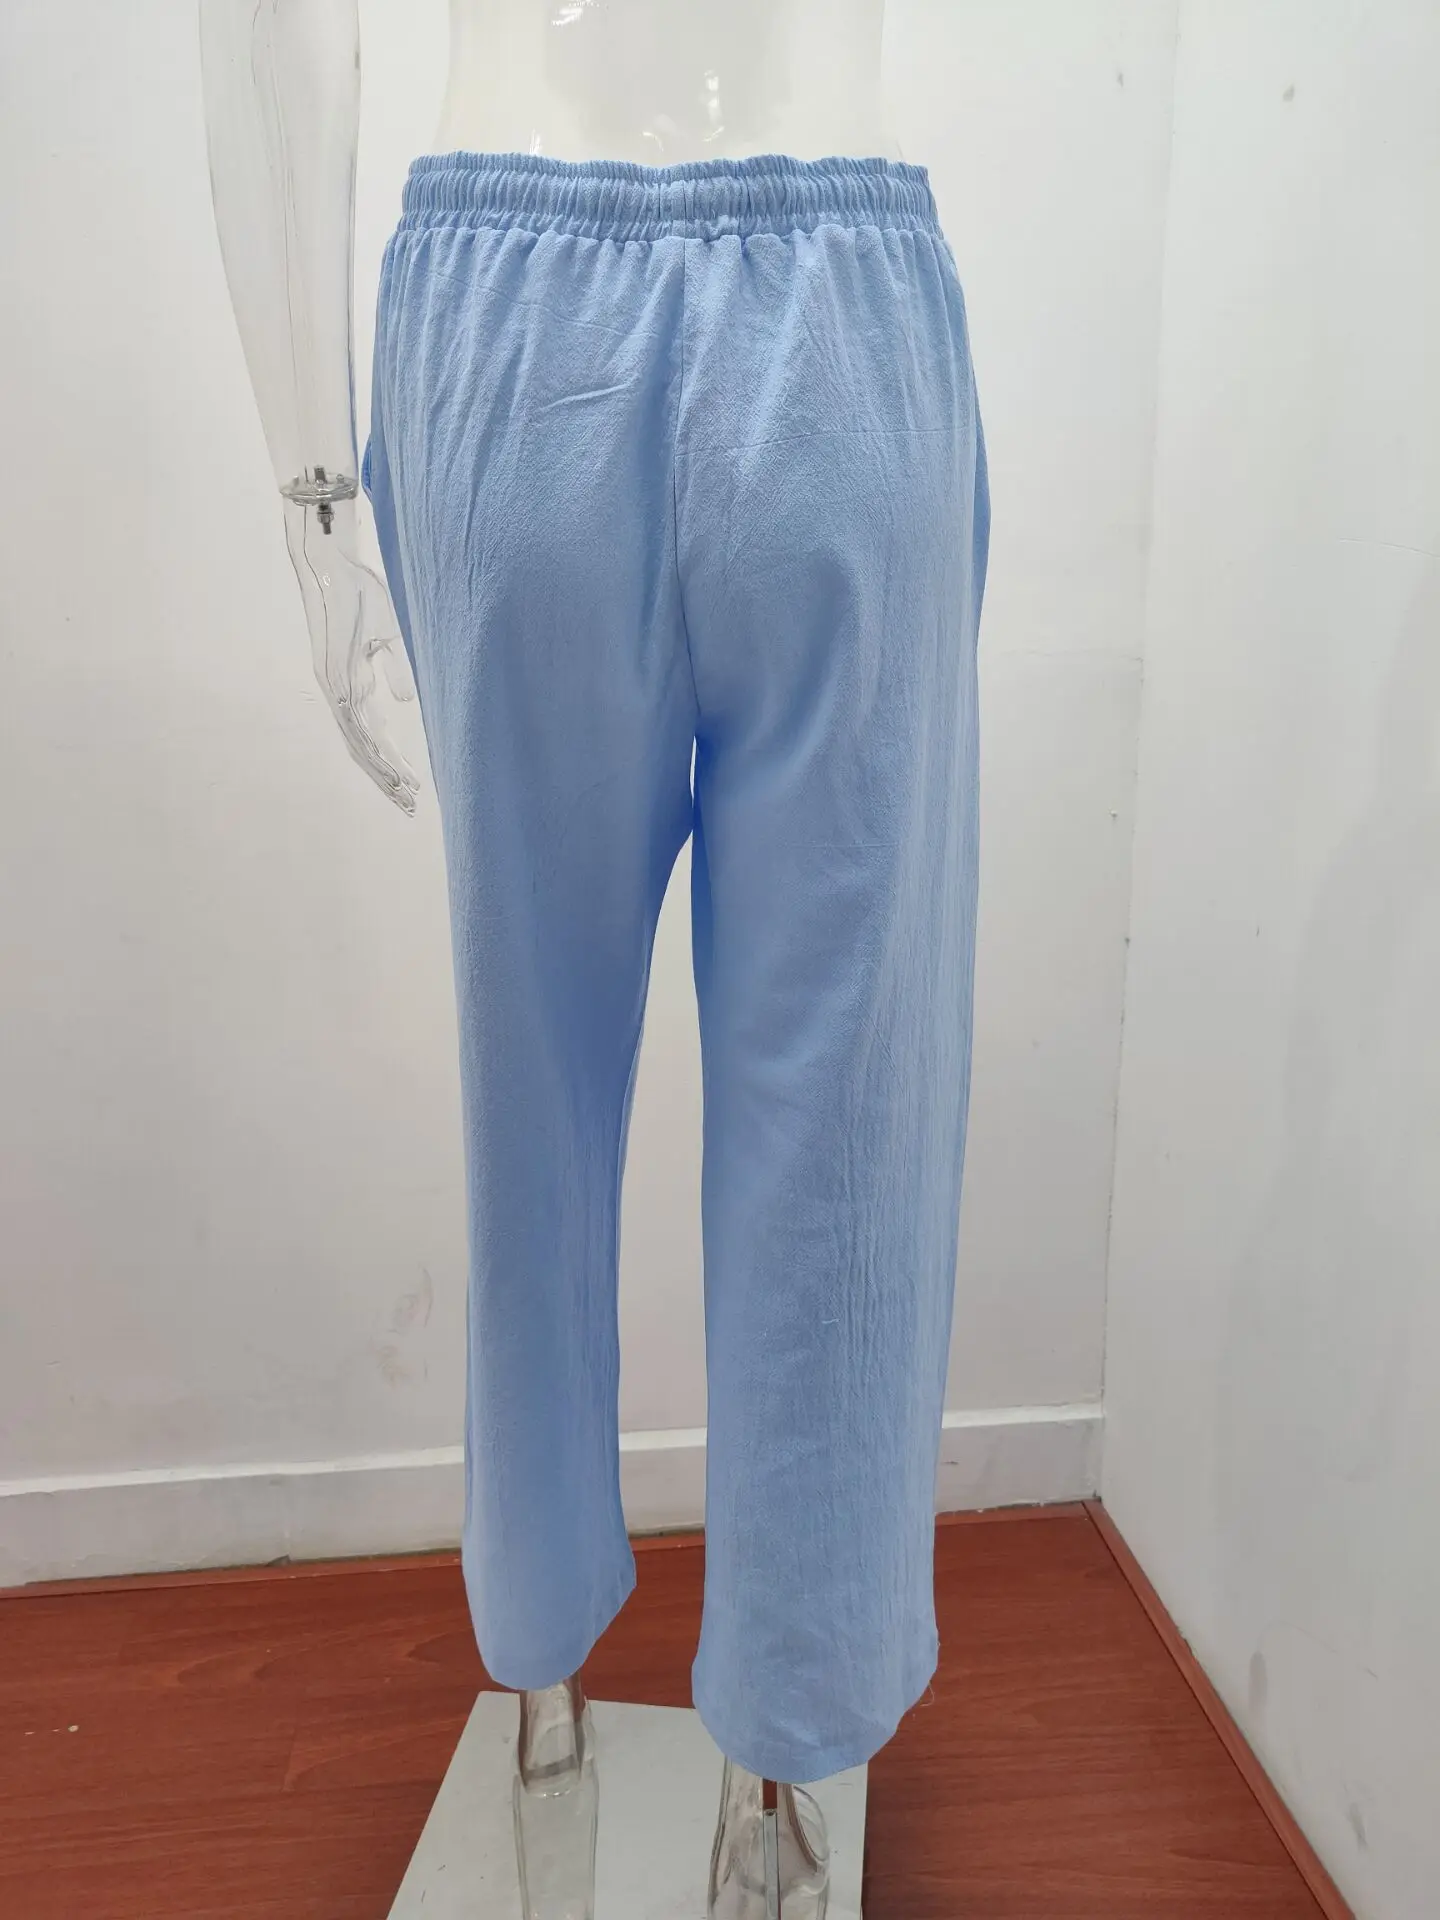 Stylish Wide Leg Pants for Women | Casual Loose Fit | Spring/Summer | Variety of Colors | Pockets & Sashes